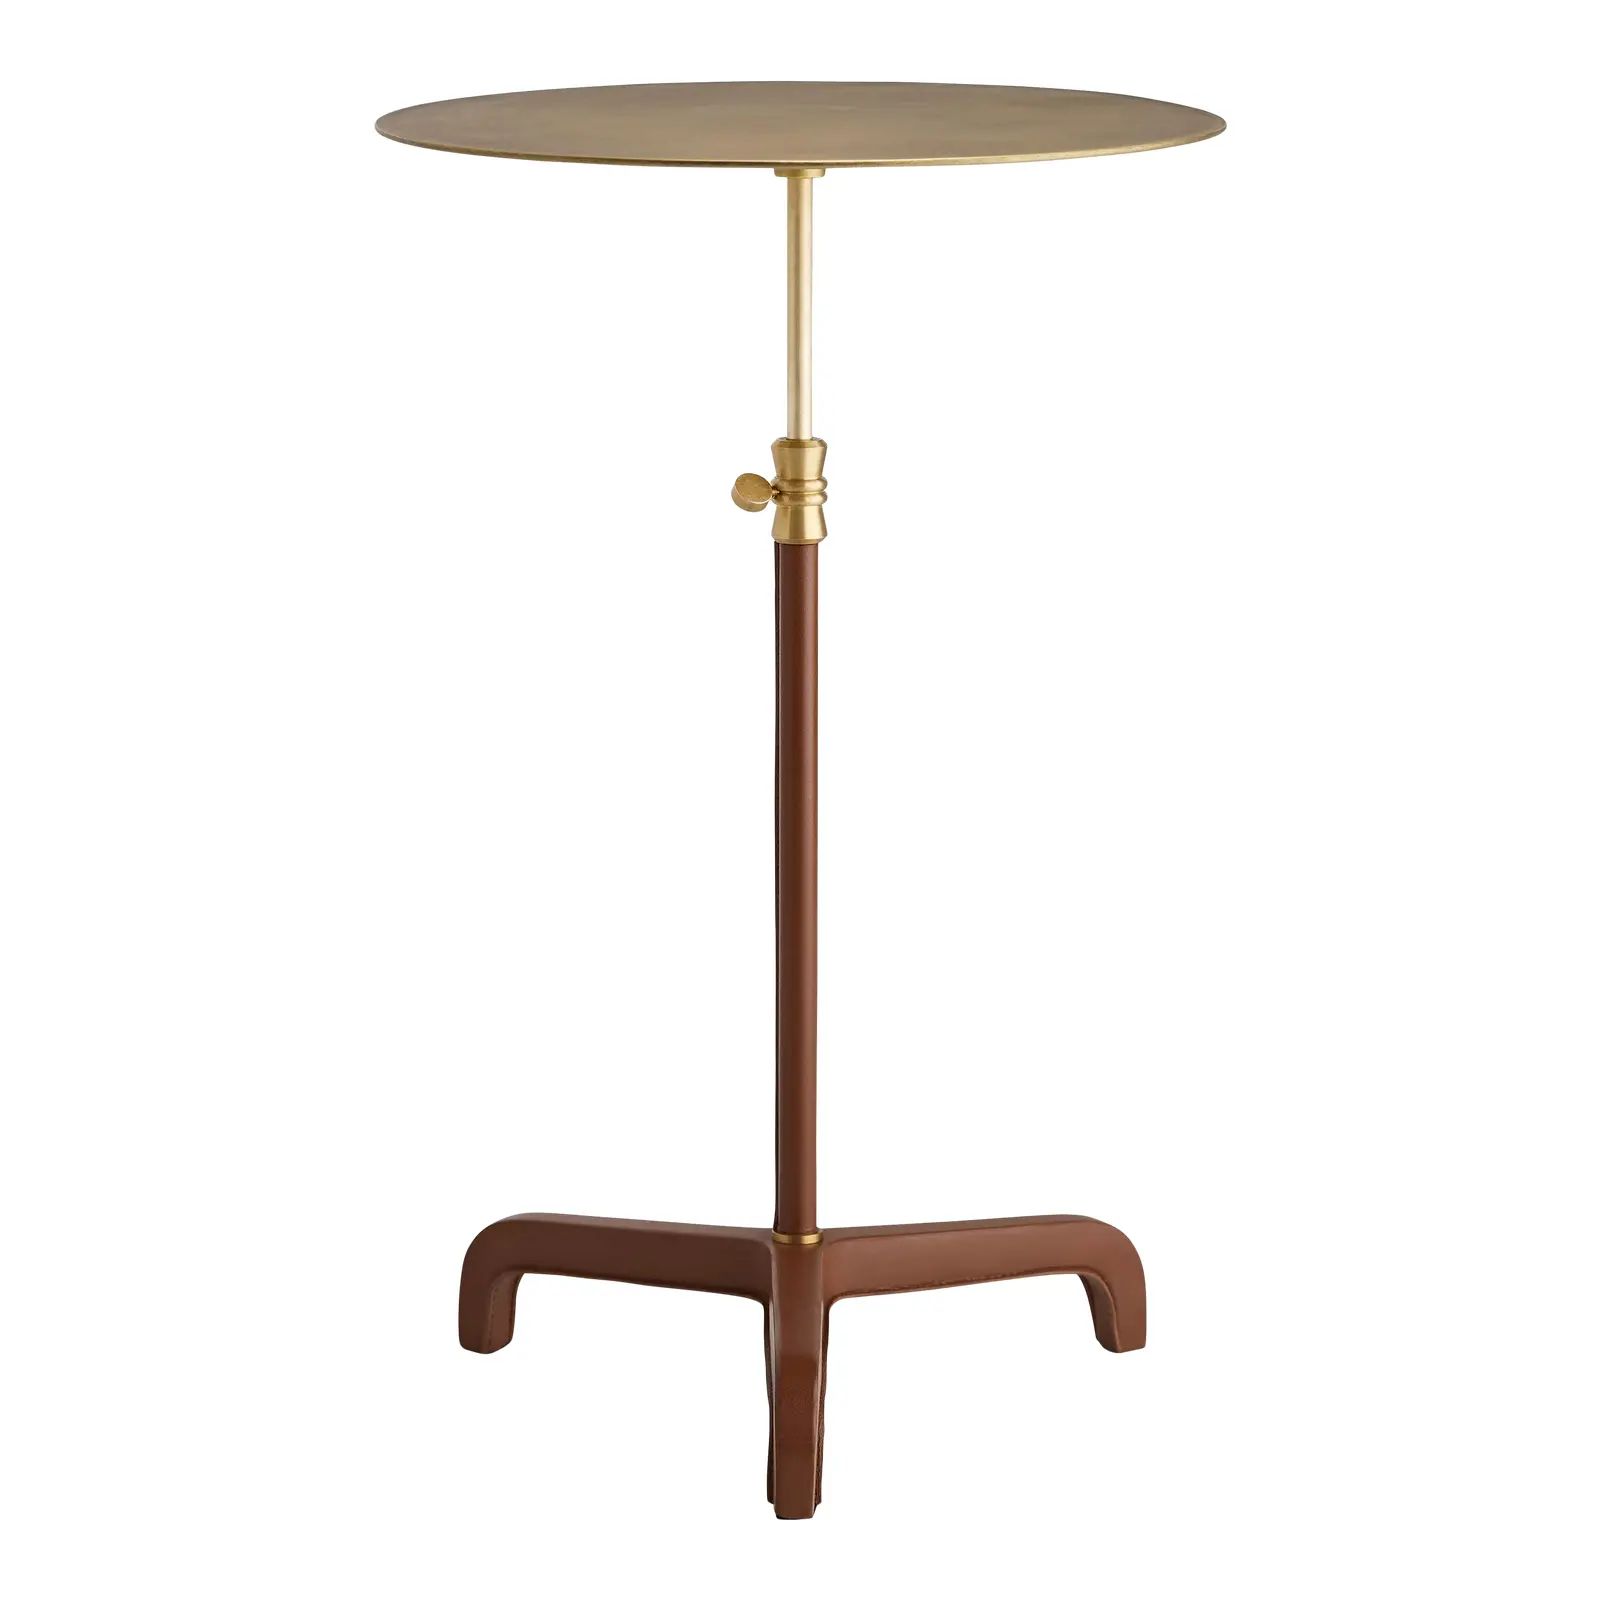 Celerie Kemble for Arteriors Addison Large Accent Table in Brown Leather | Chairish